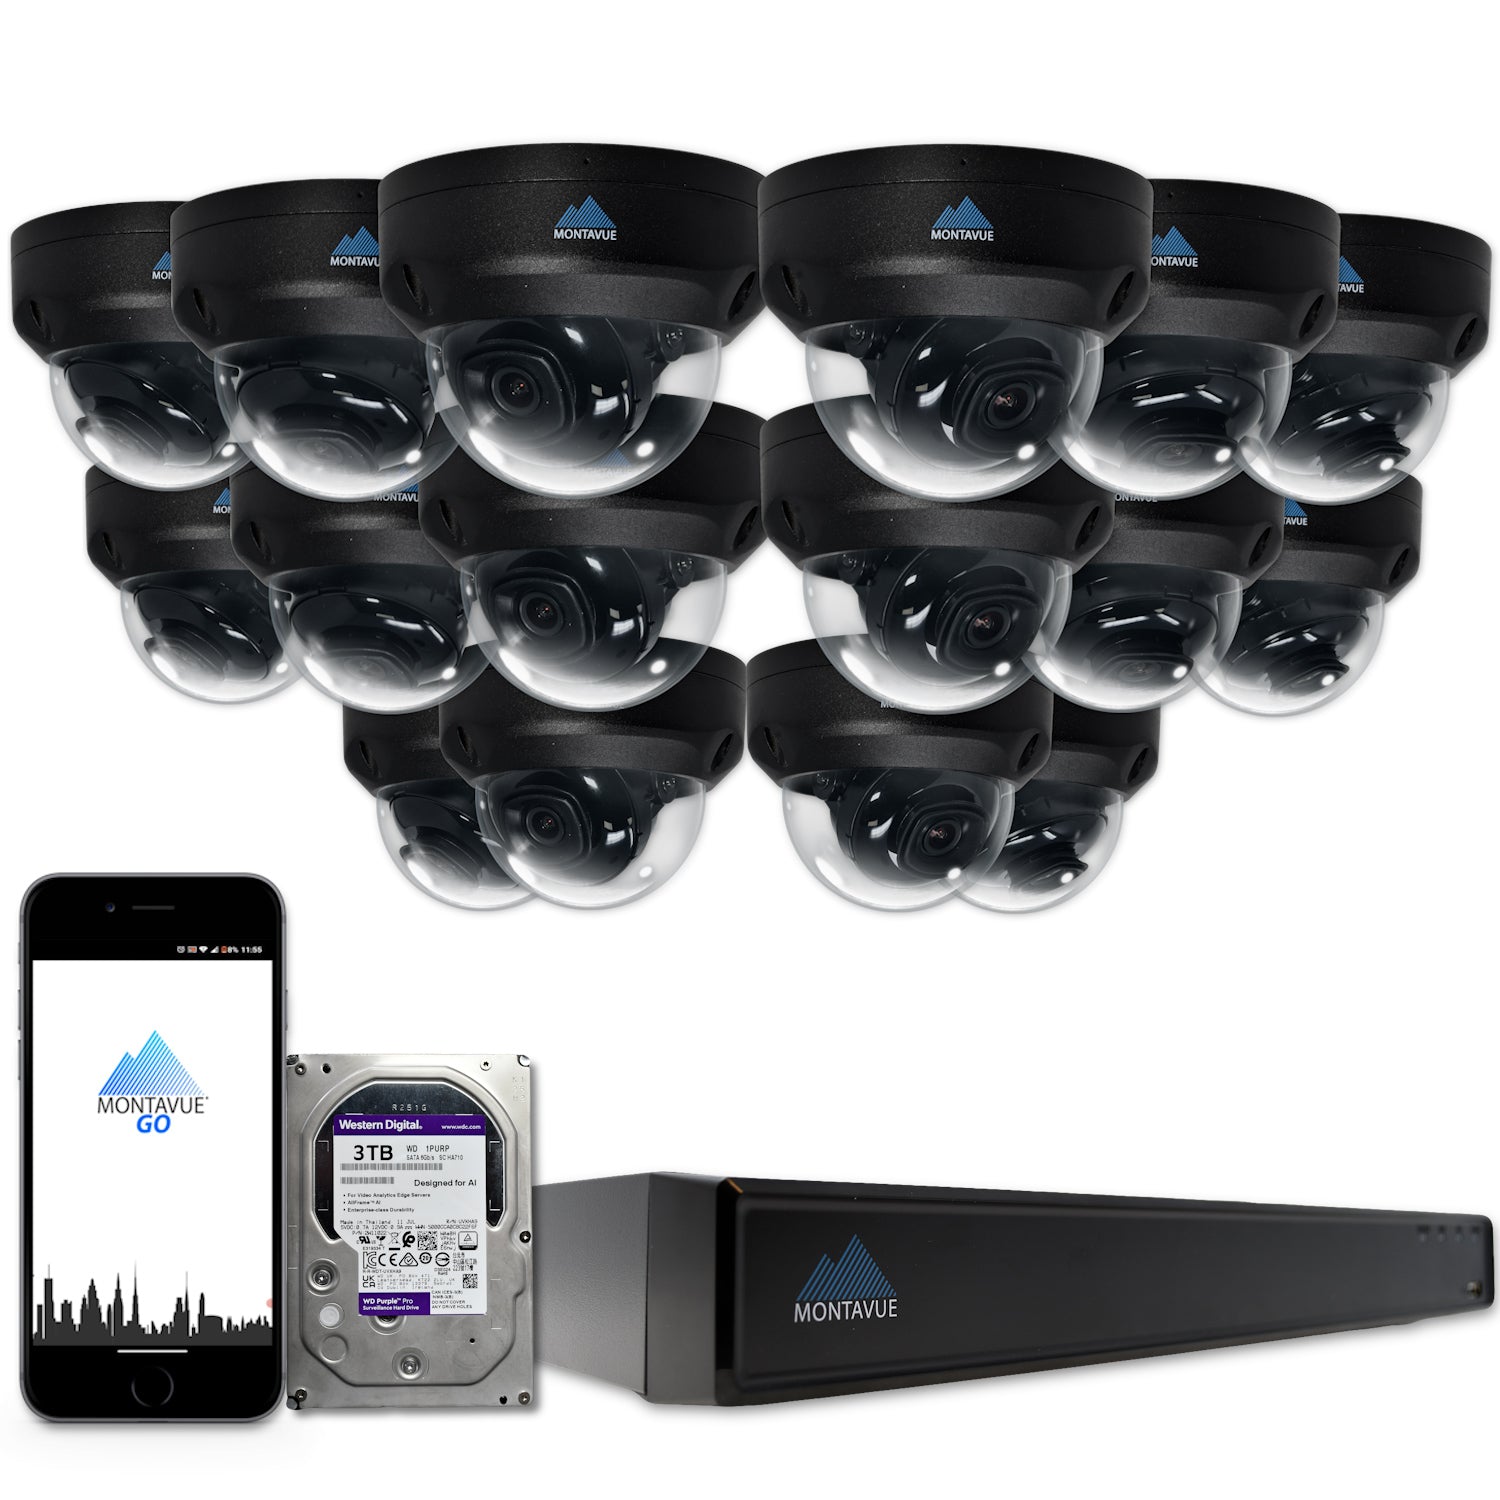 MTD4095 Package | 4MP 2K SMD+ Dome Cameras and 16 Channel NVR with 3TB HDD - Montavue